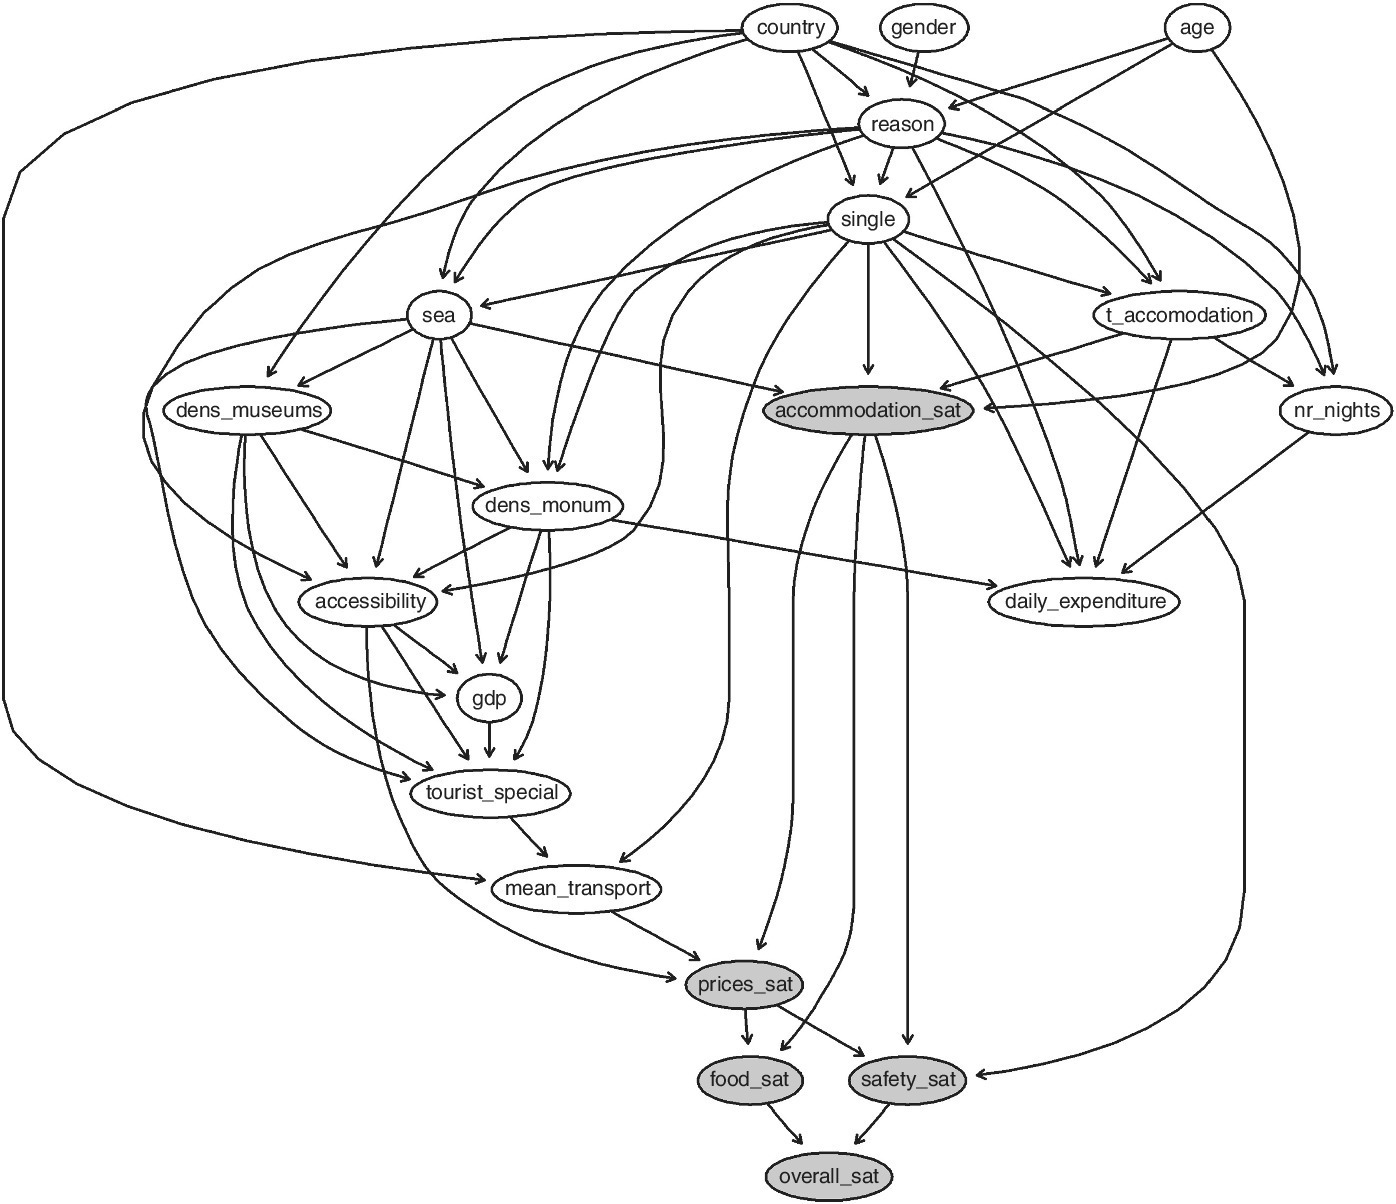 Bayesian network displaying 20 ellipses having labels and interconnected by arrows.  Five of the ellipses are shaded and are labeled accommodation_sat, prices_sat, food_sat, safety_sat, and overall_sat.